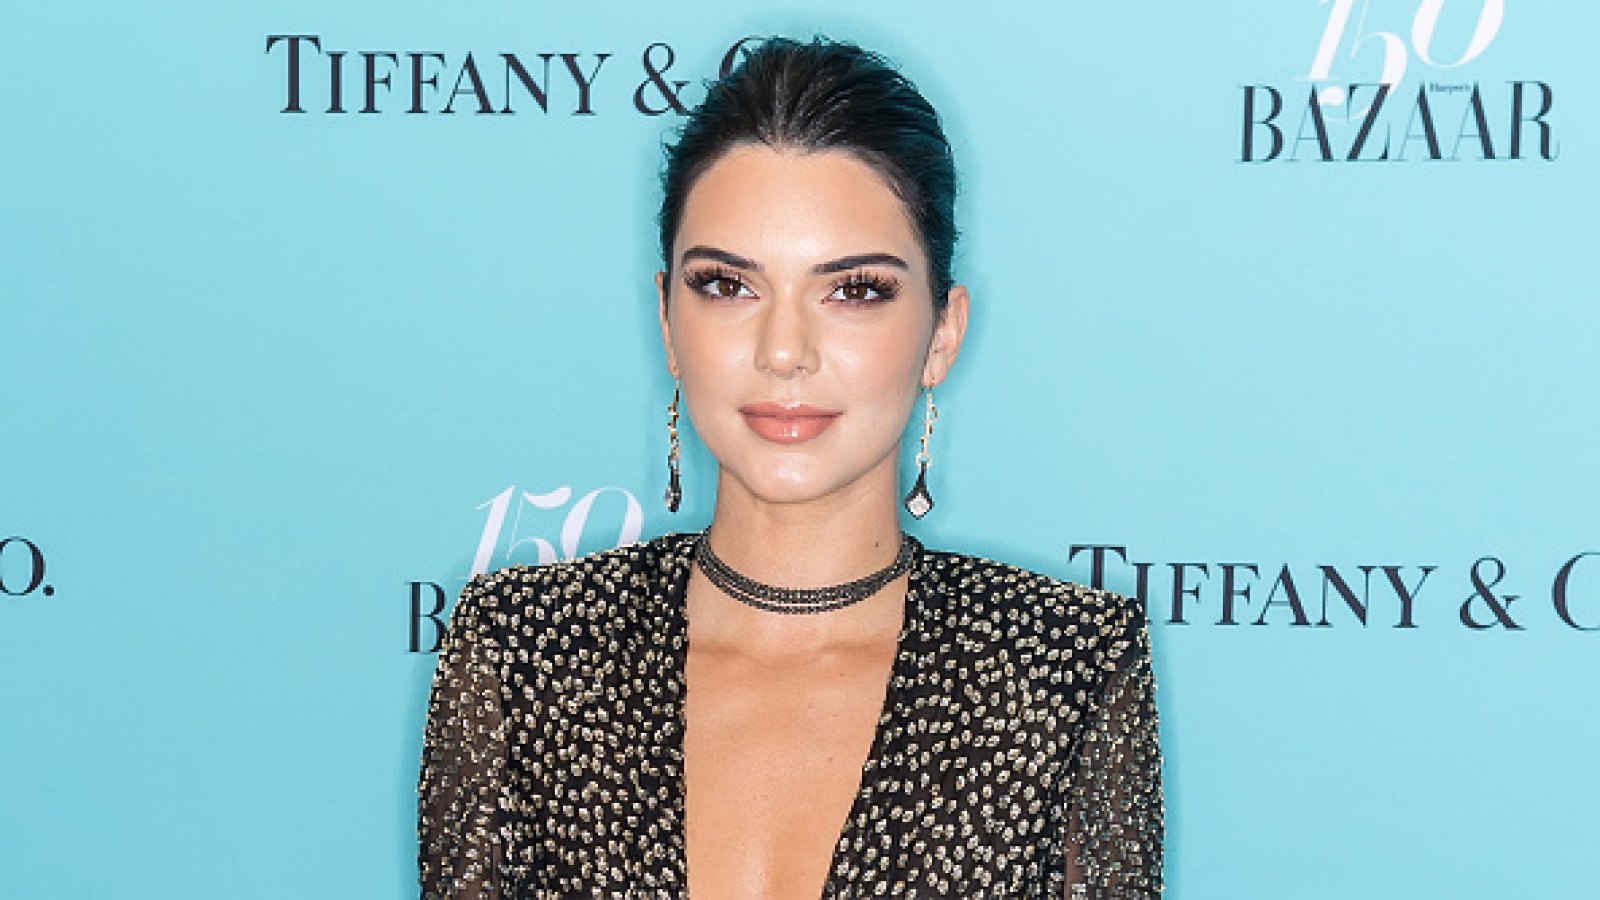 Kendall Jenner poses topless